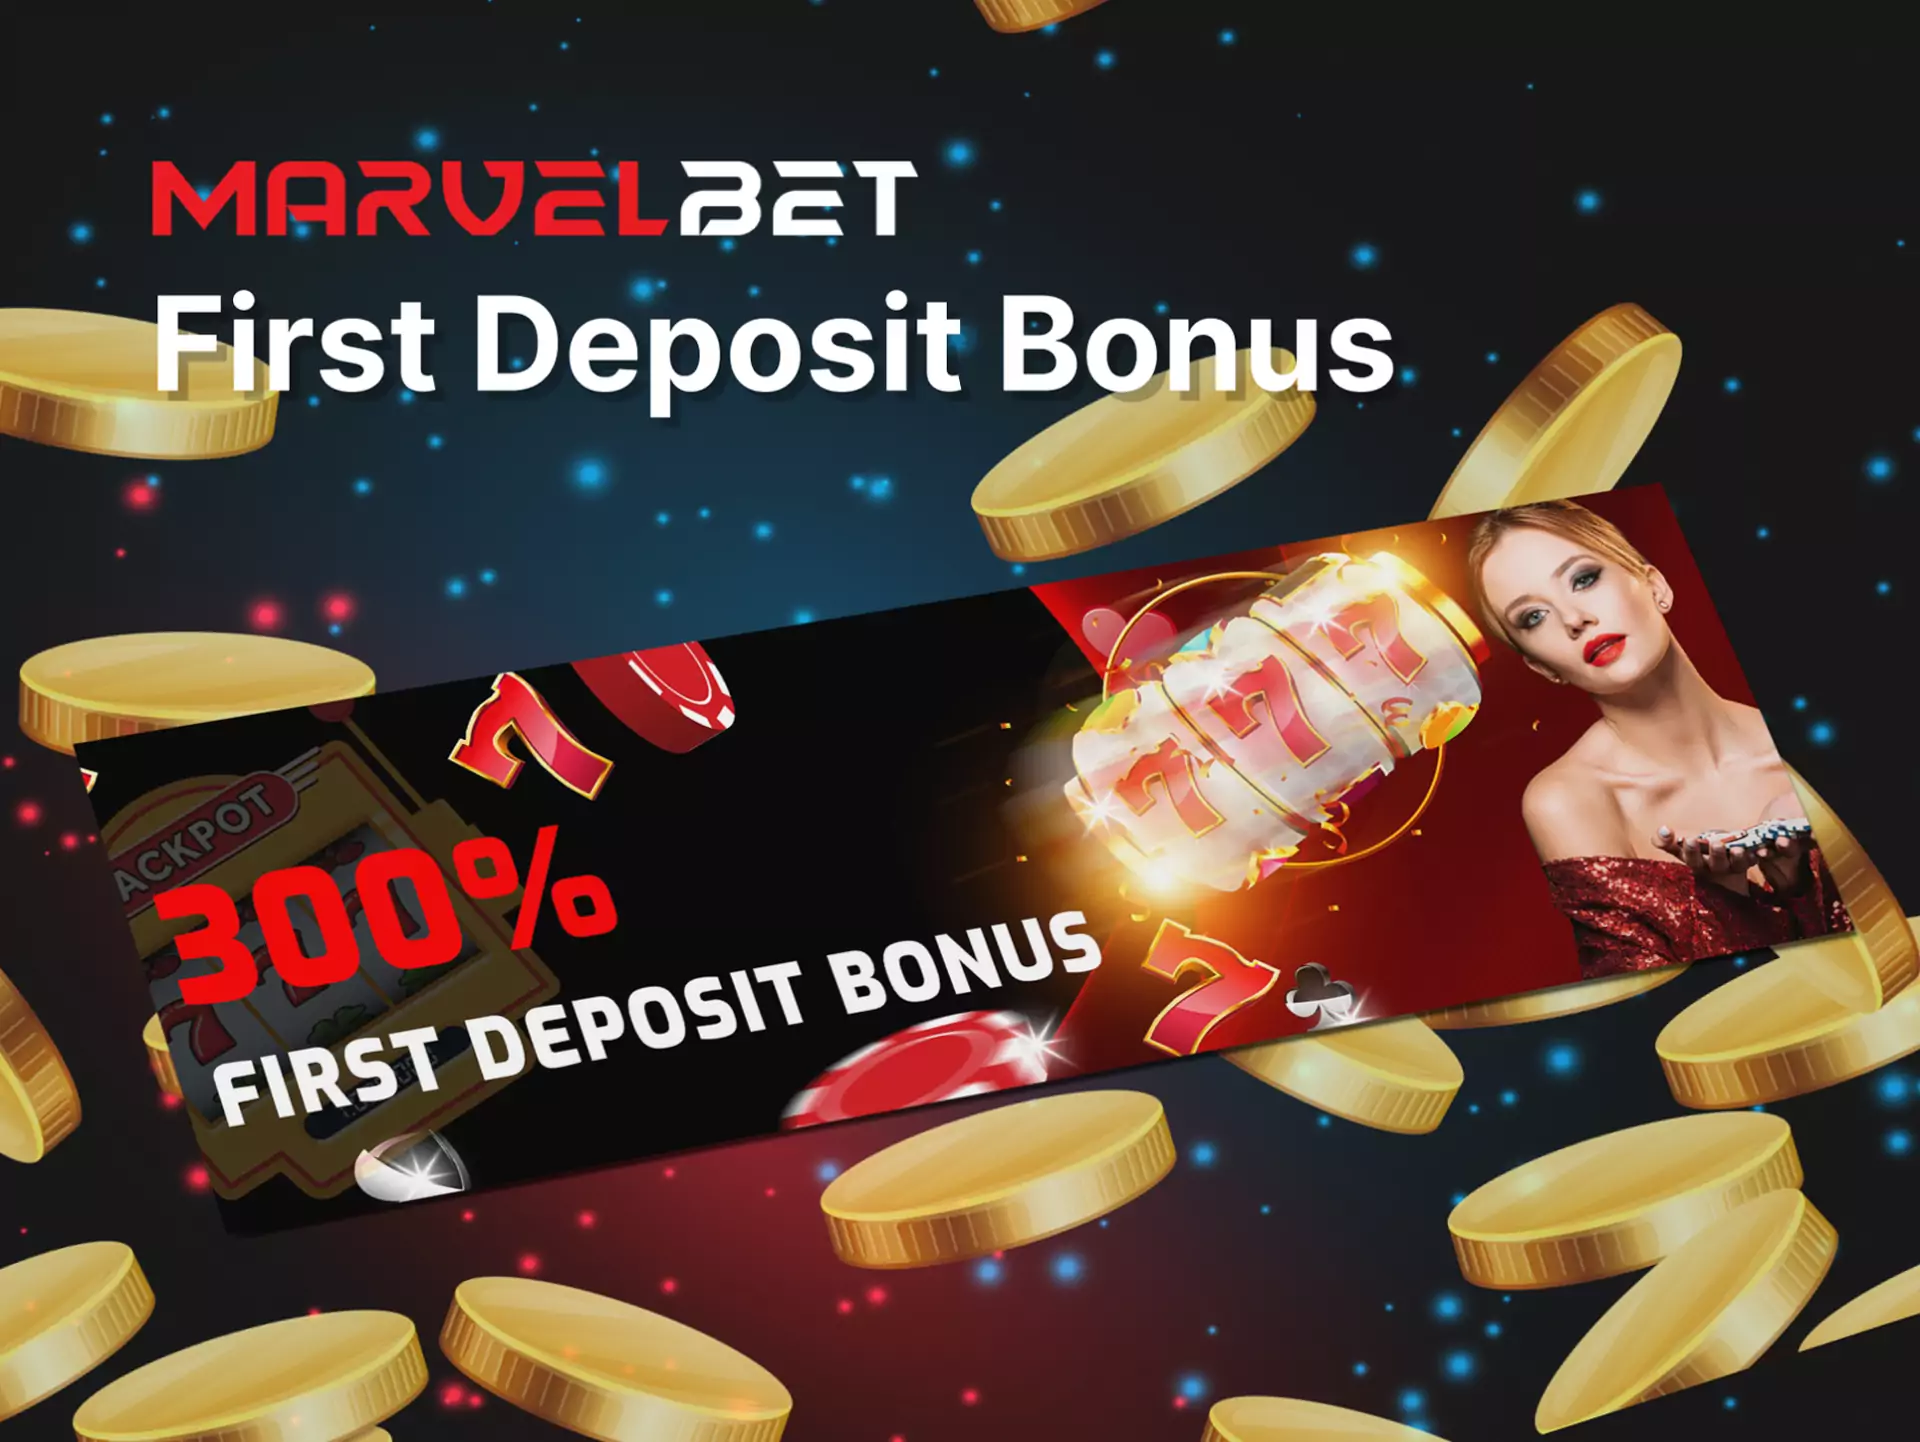 New users get the bonus on the first deposit to the Marvelbet account.